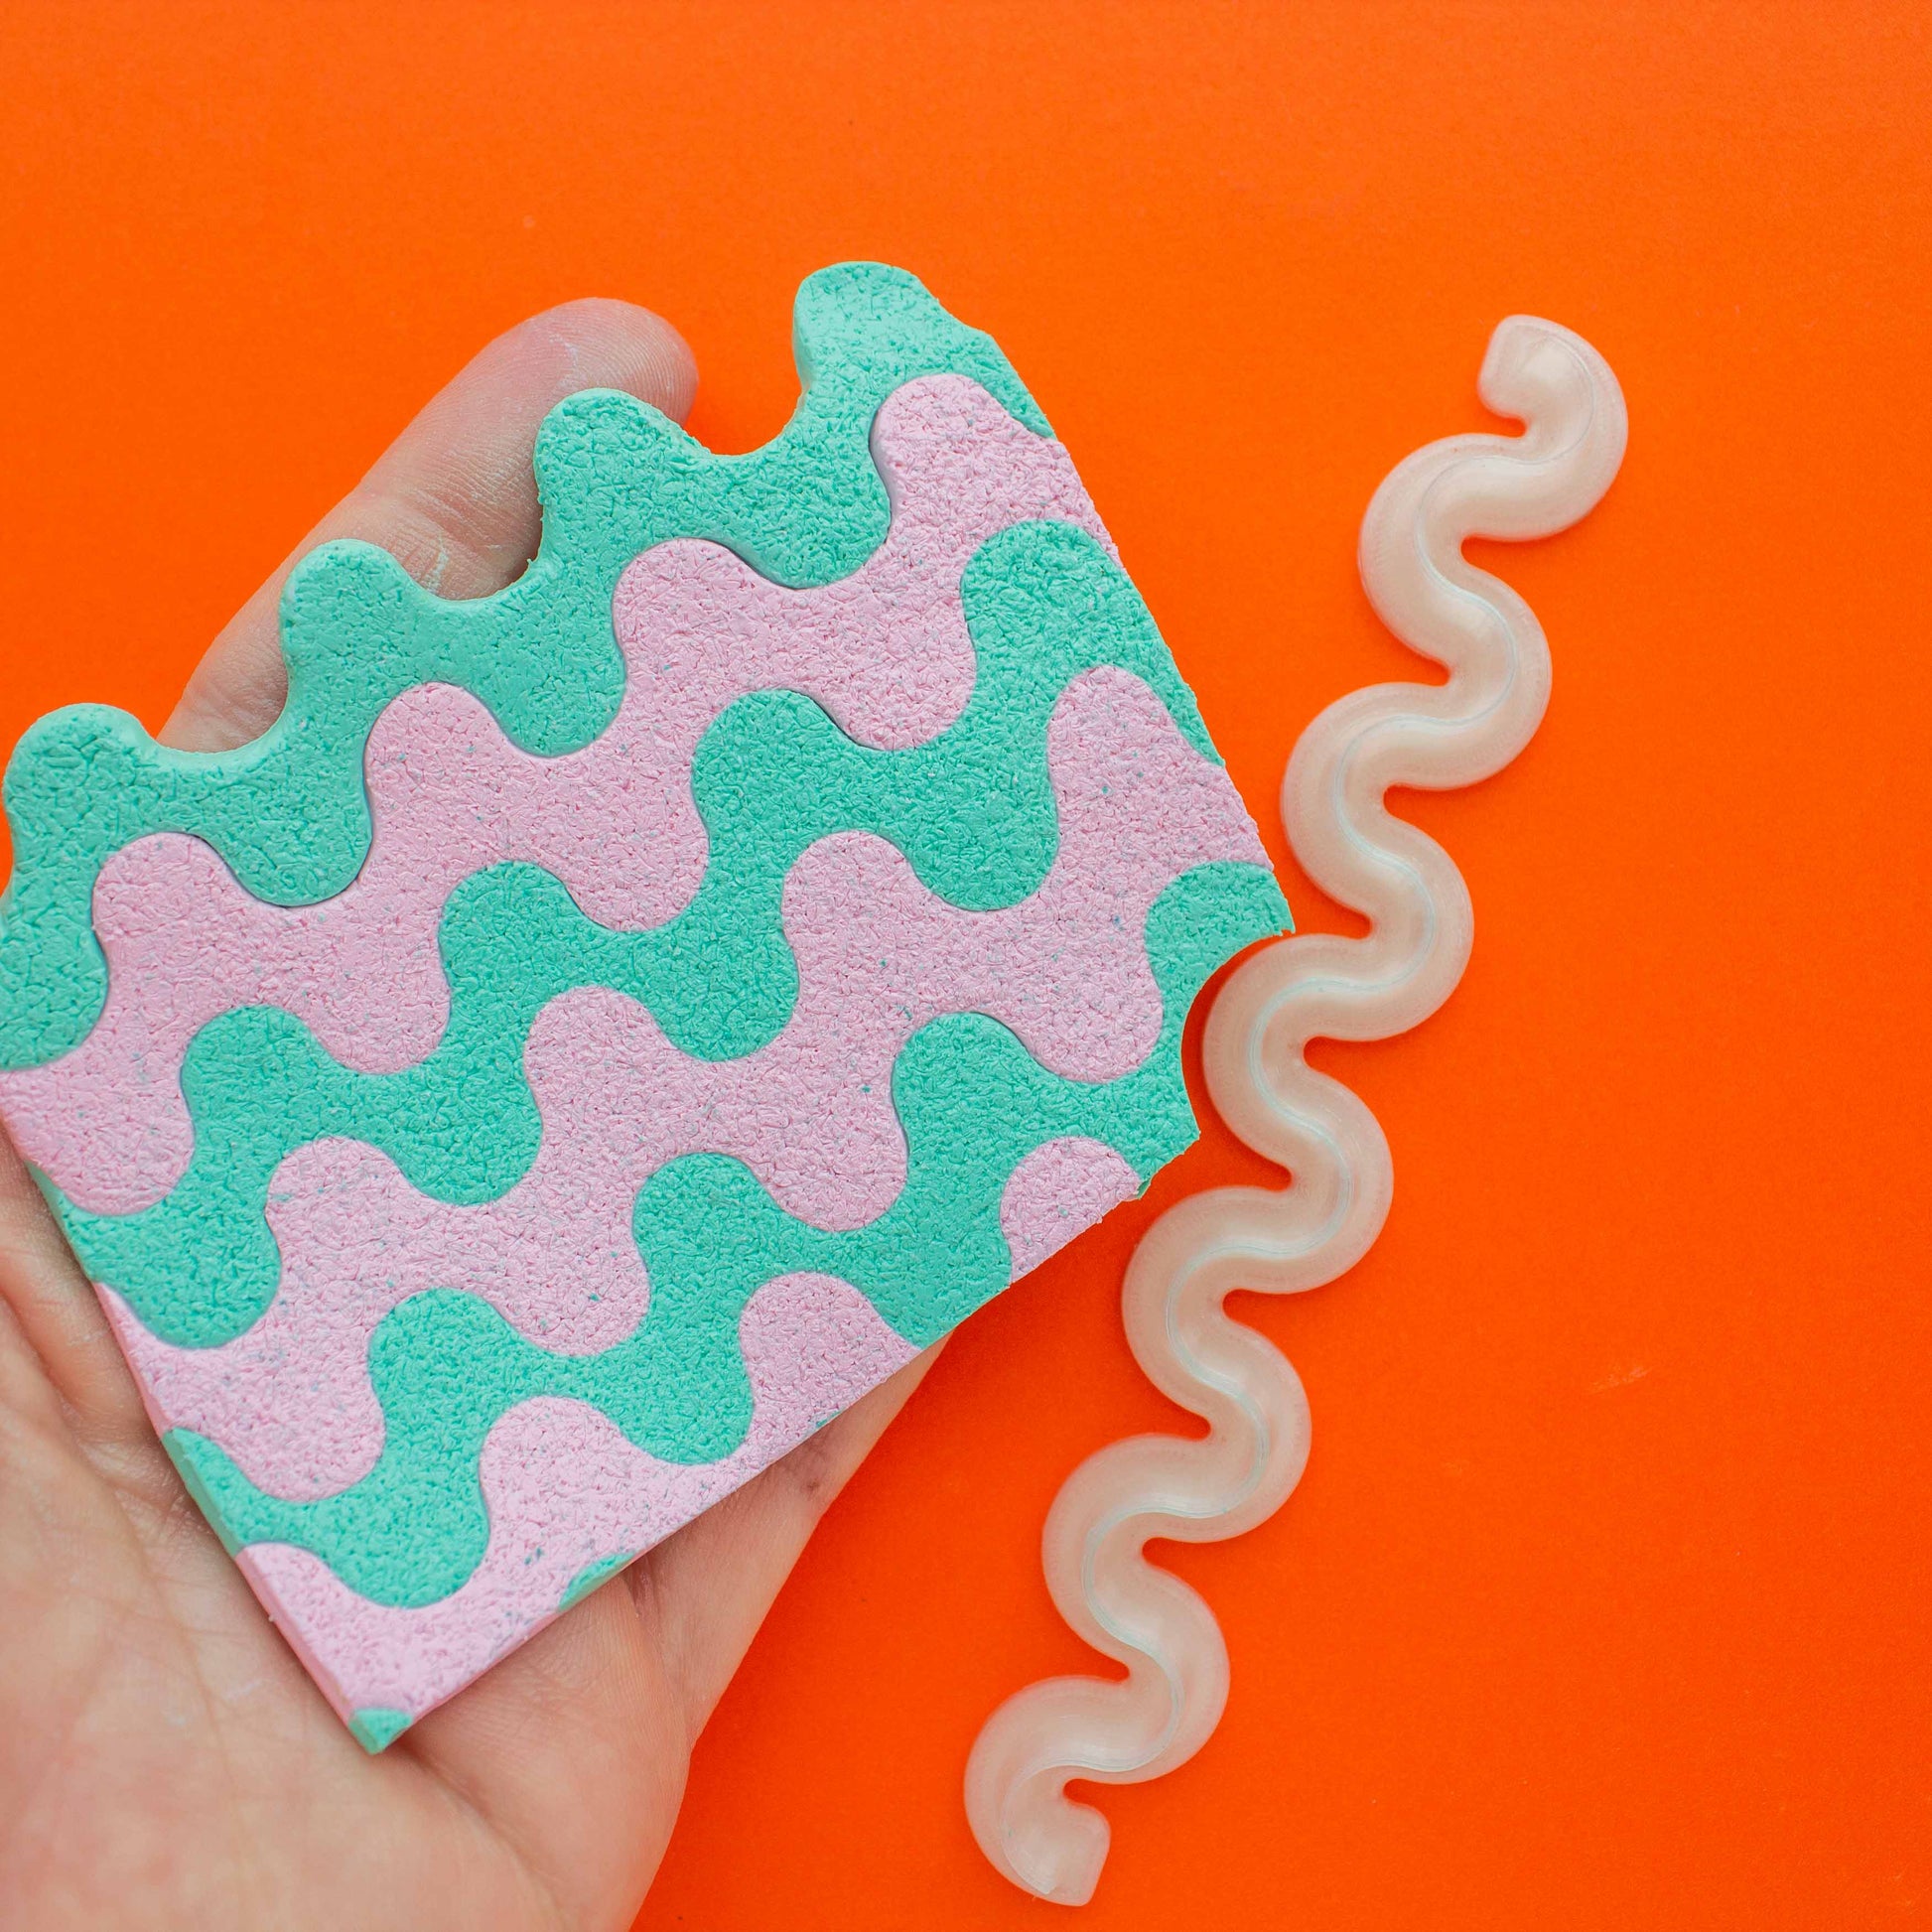 polymer clay colorful slab and one wiggle 3d printed blade in an orange background